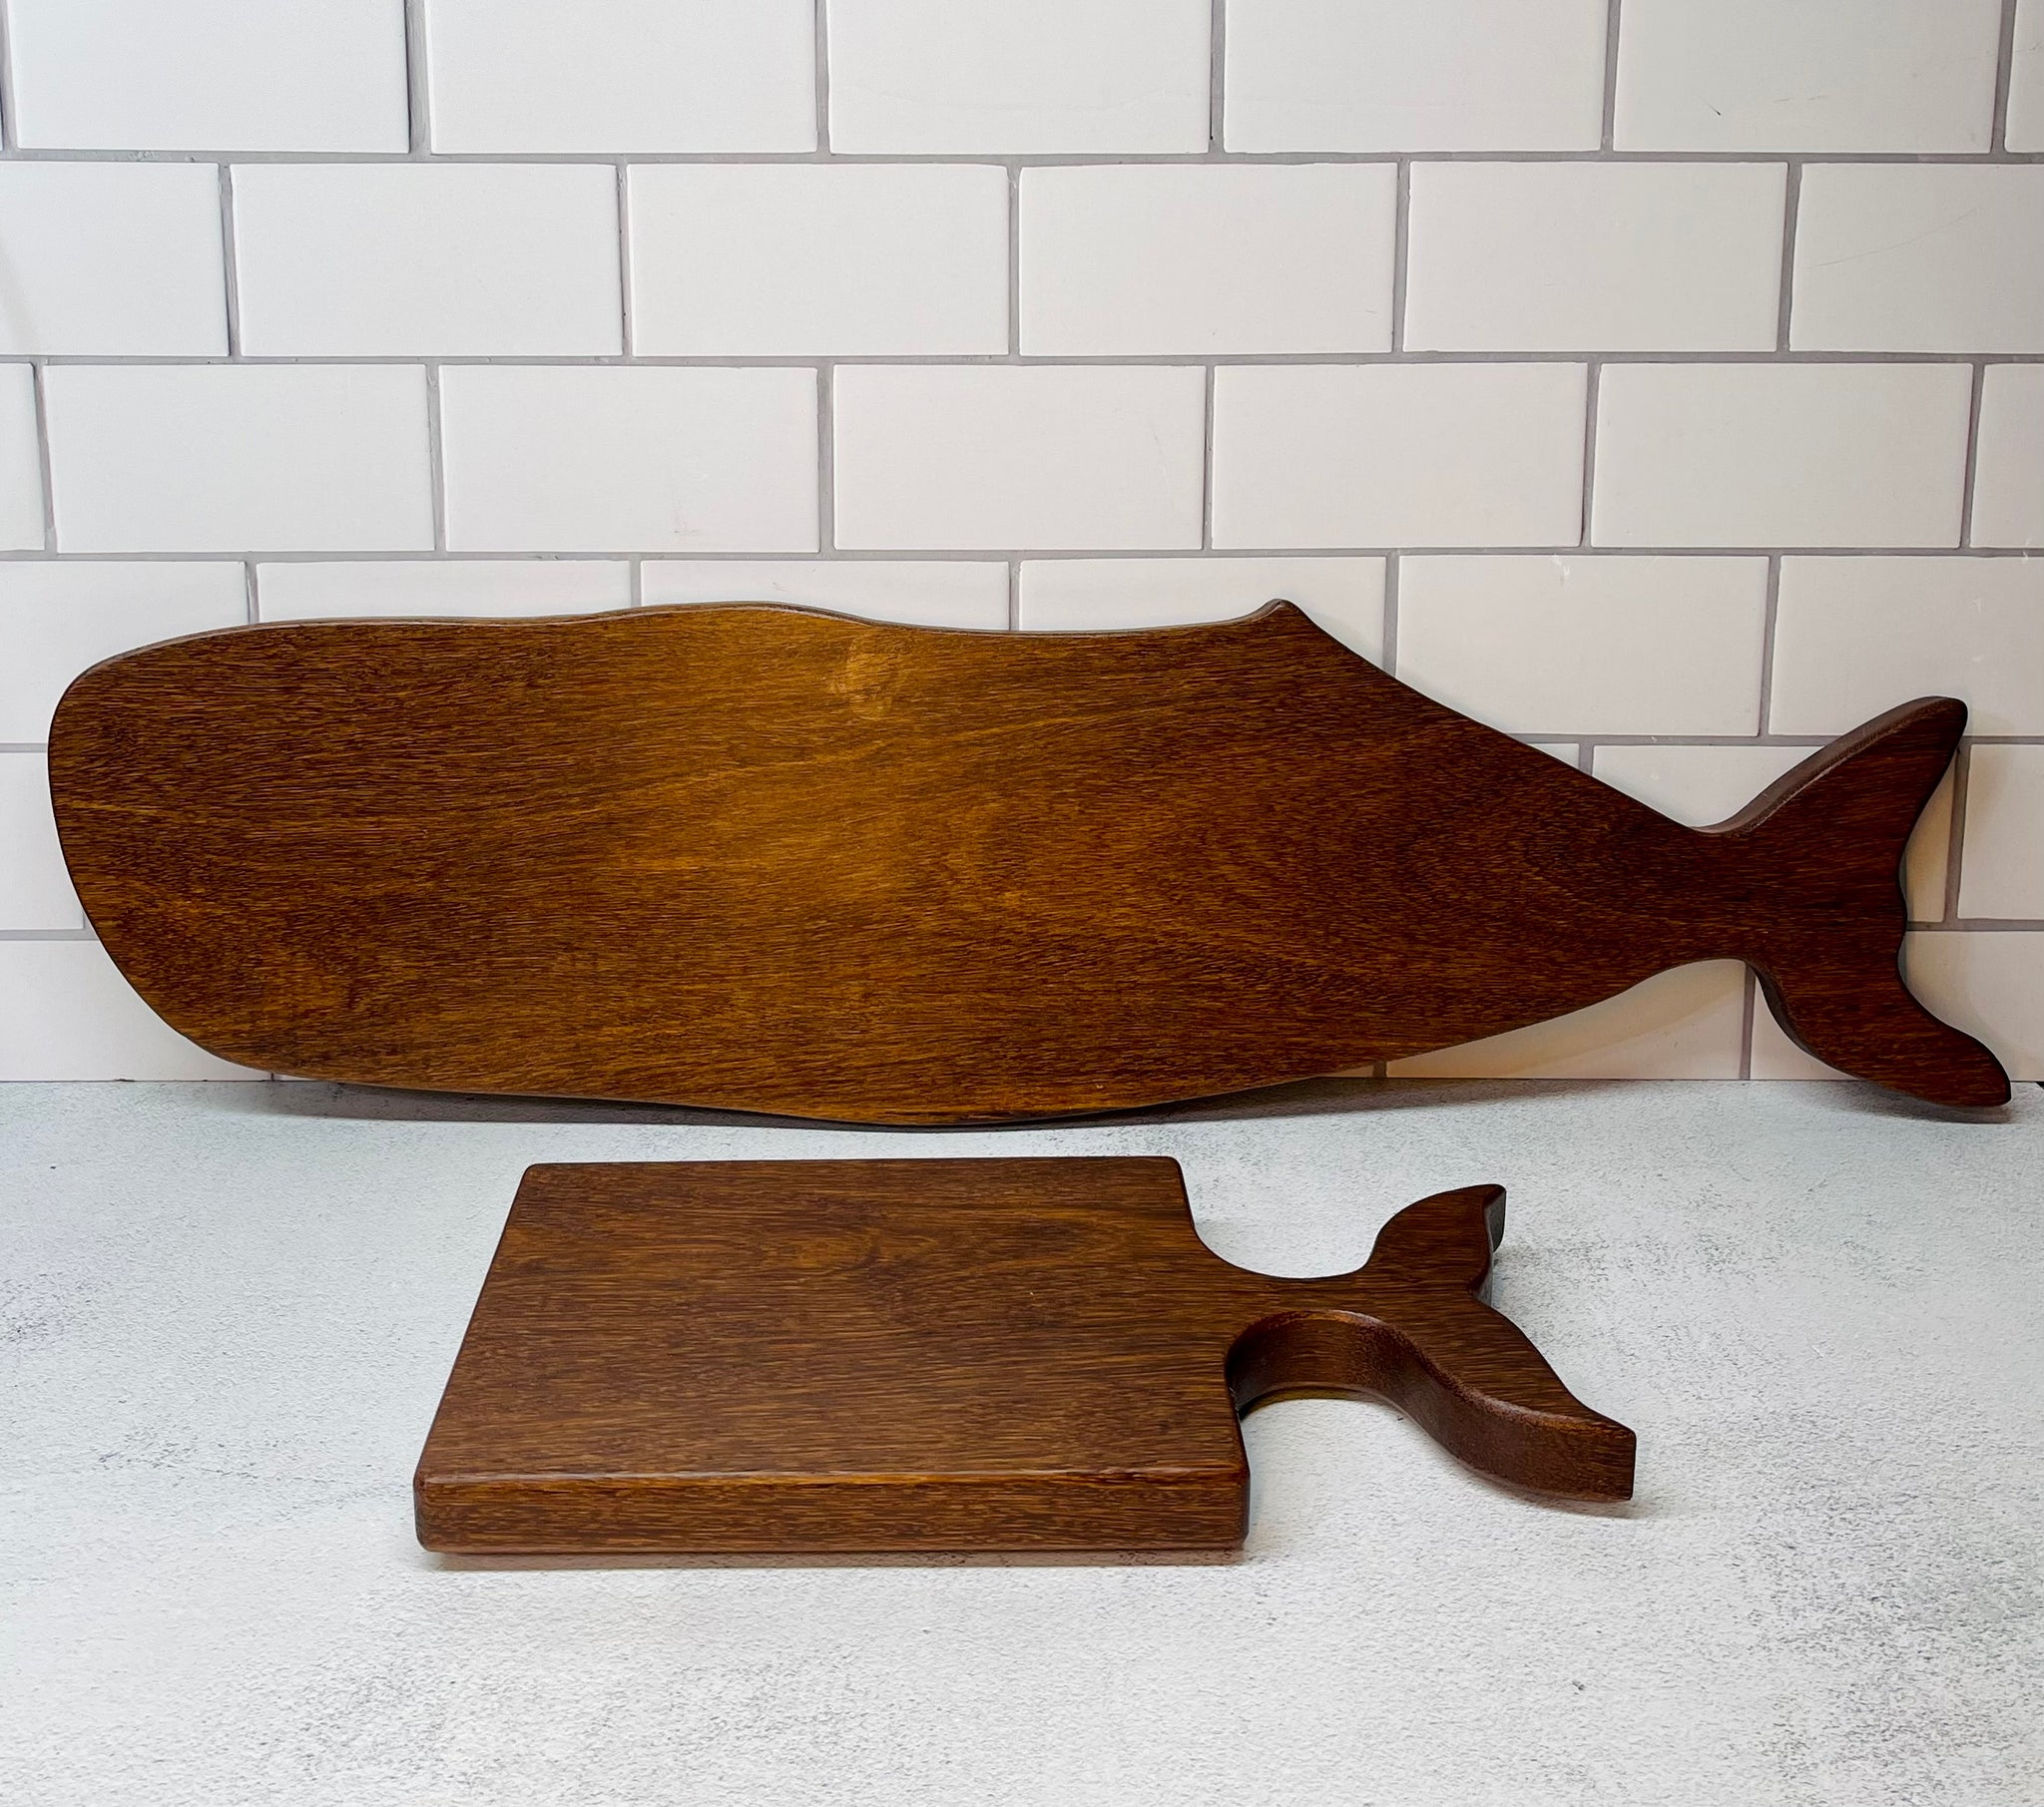 Whales & Fish Cutting Boards Class